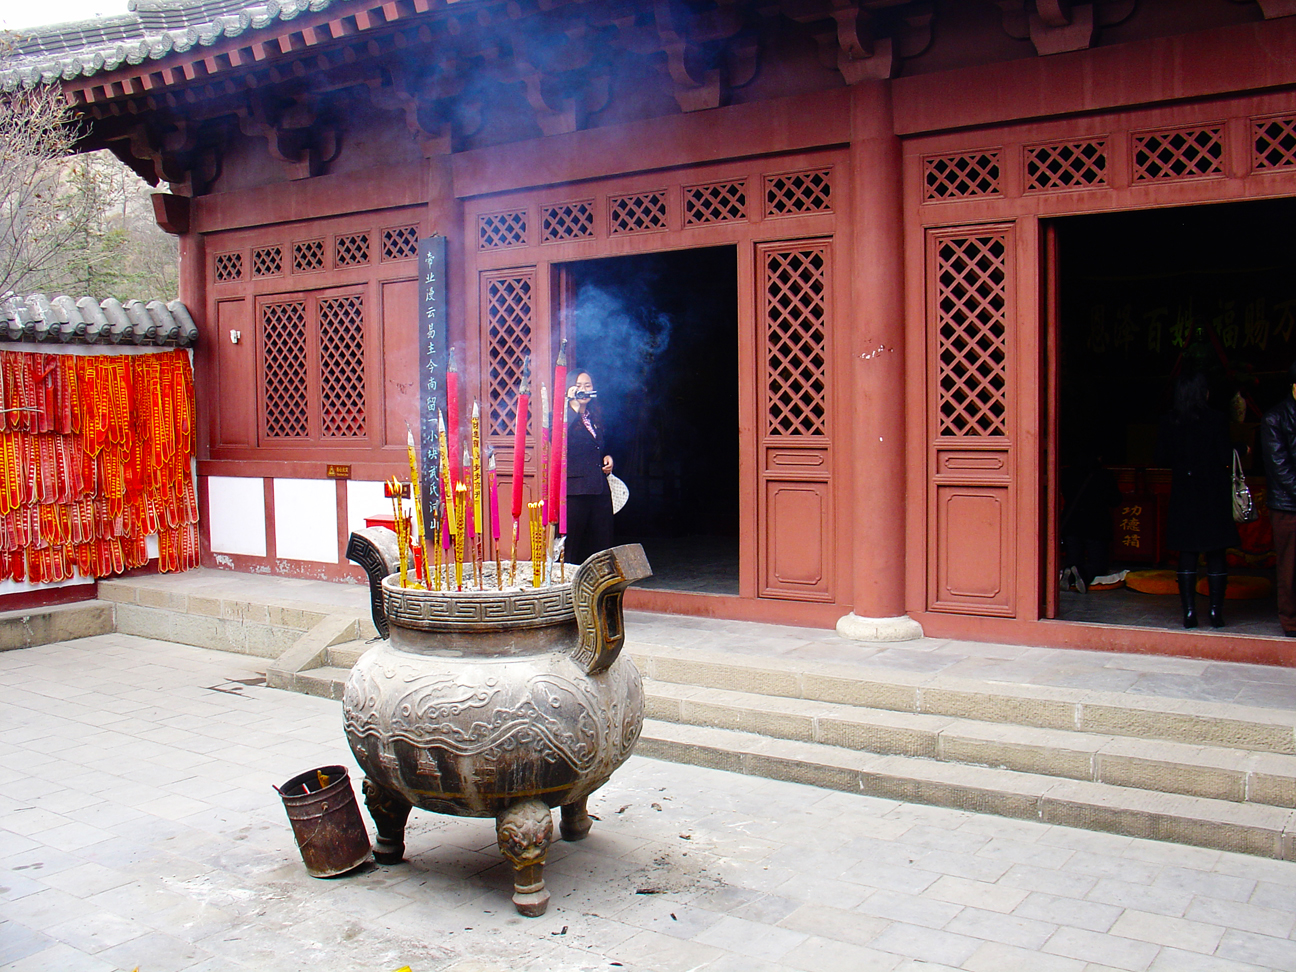 Incenses burned by women to pray to the empress